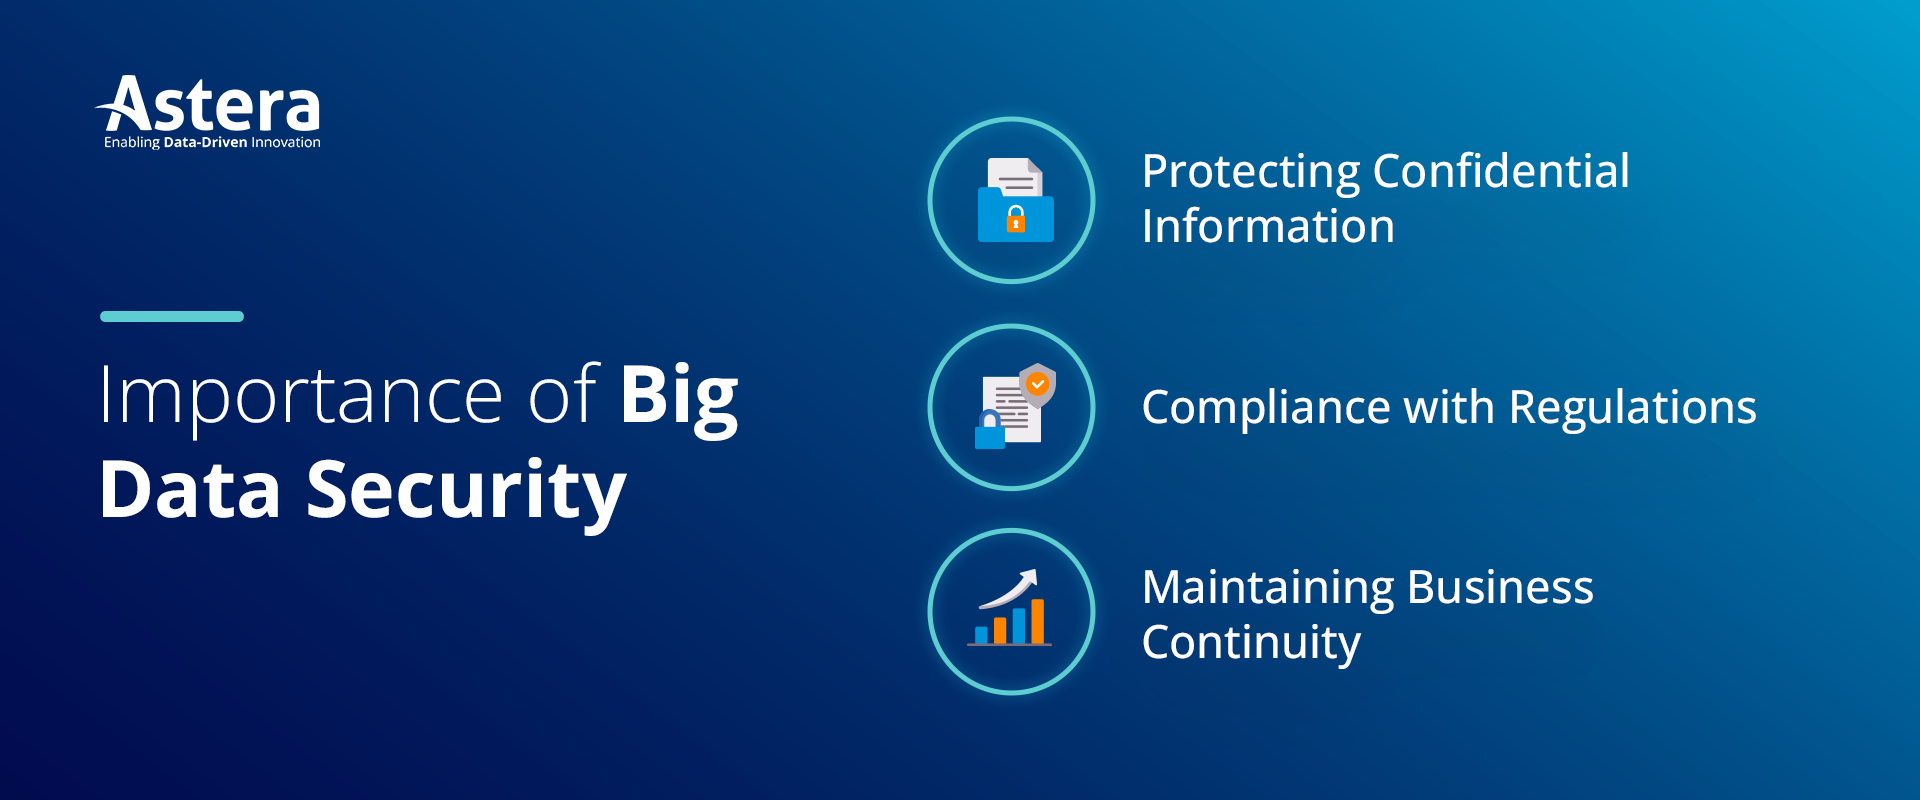 Importance of big data security